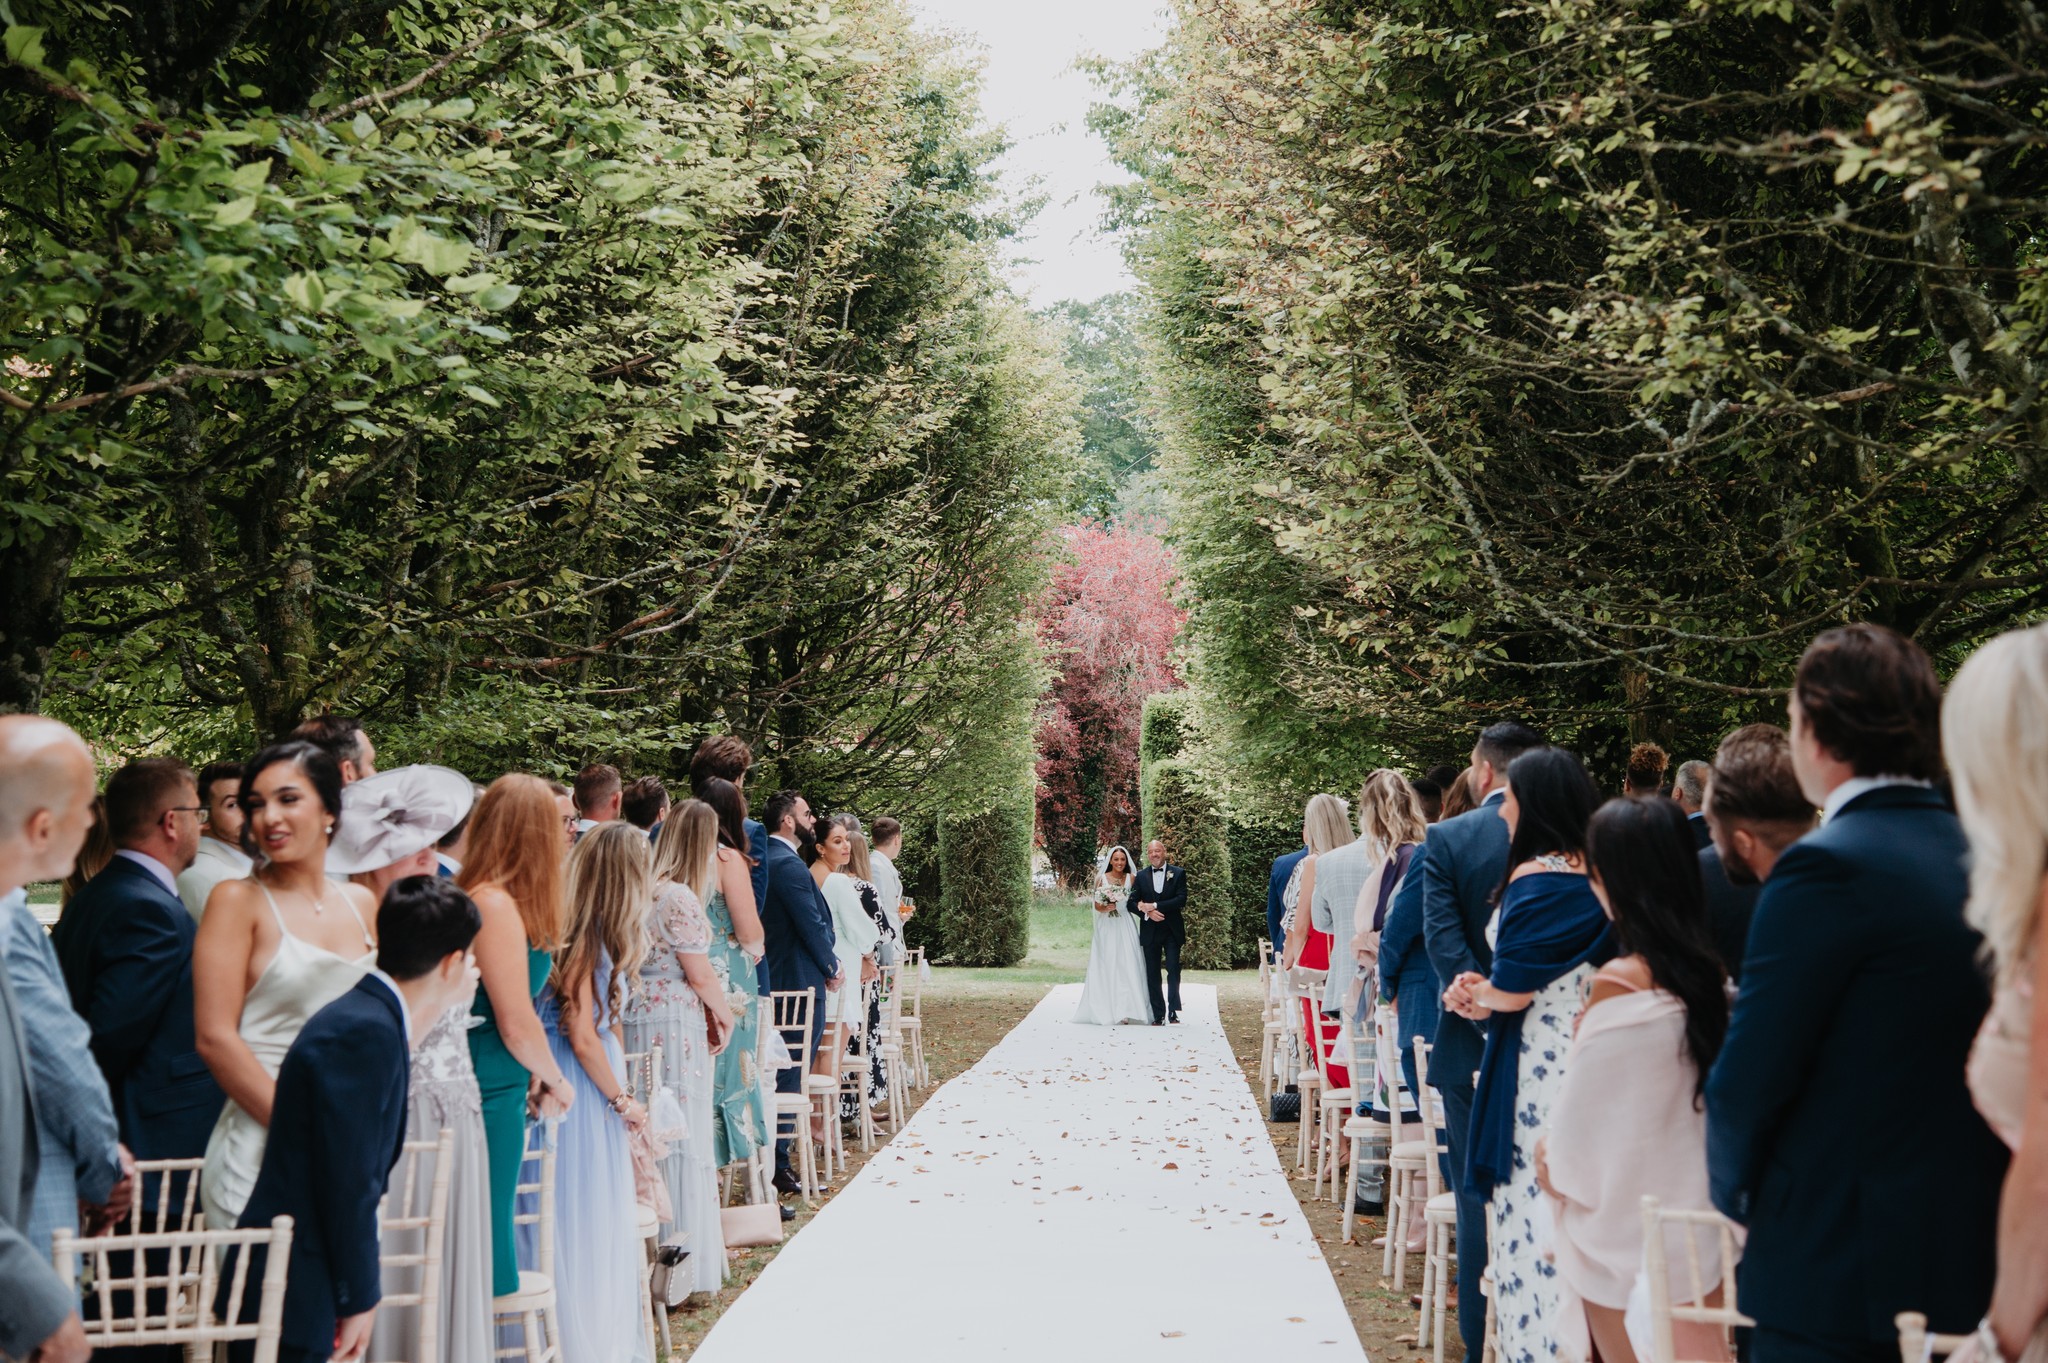 Book your 2024 wedding with us today and let's begin this unforgettable journey together. 💍💕 Here's one from Ty & Claudia's stunning day ❤️ #WeddingPlanning2024 #ExperiencedPlanners #DreamWeddingComingSoon